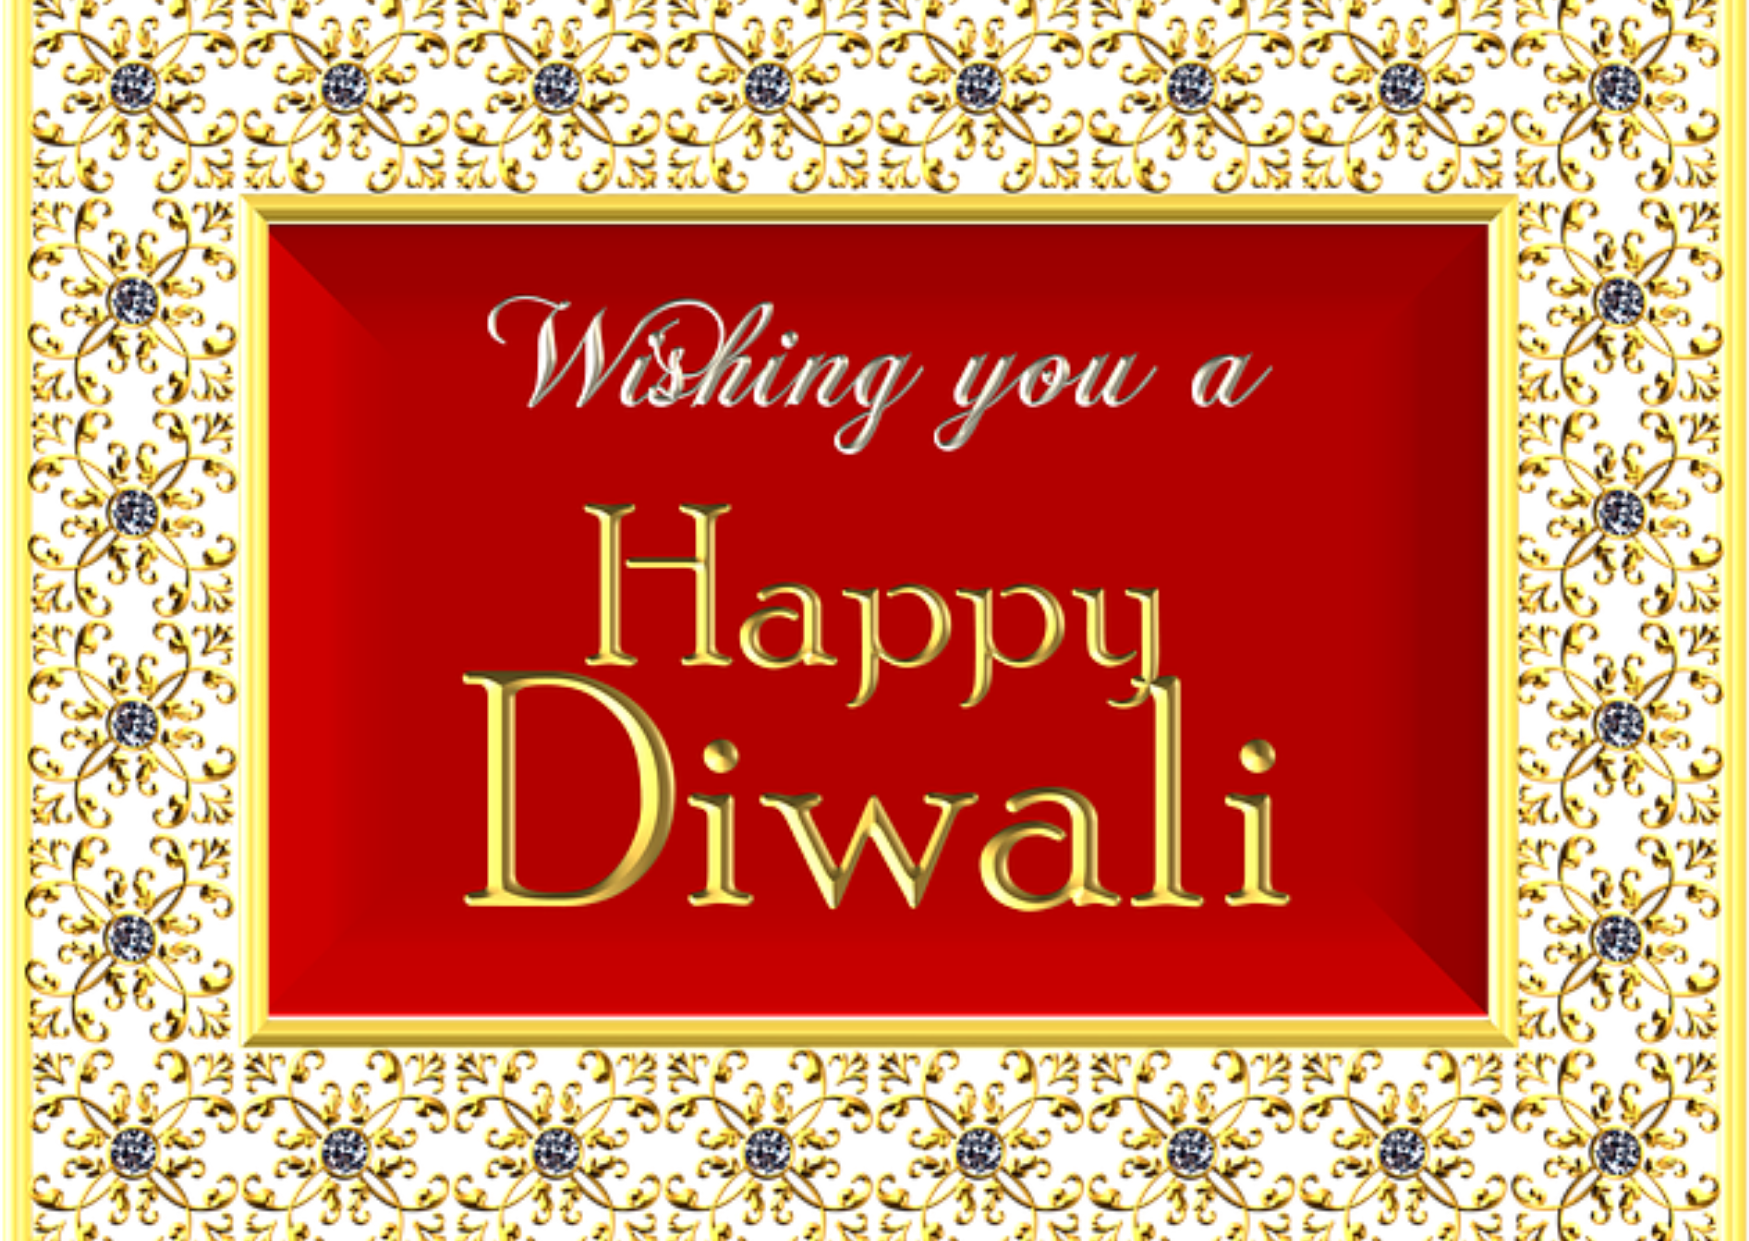 Happy Diwali Wishes, Images, quotes, status, greeting for whatsapp free download,